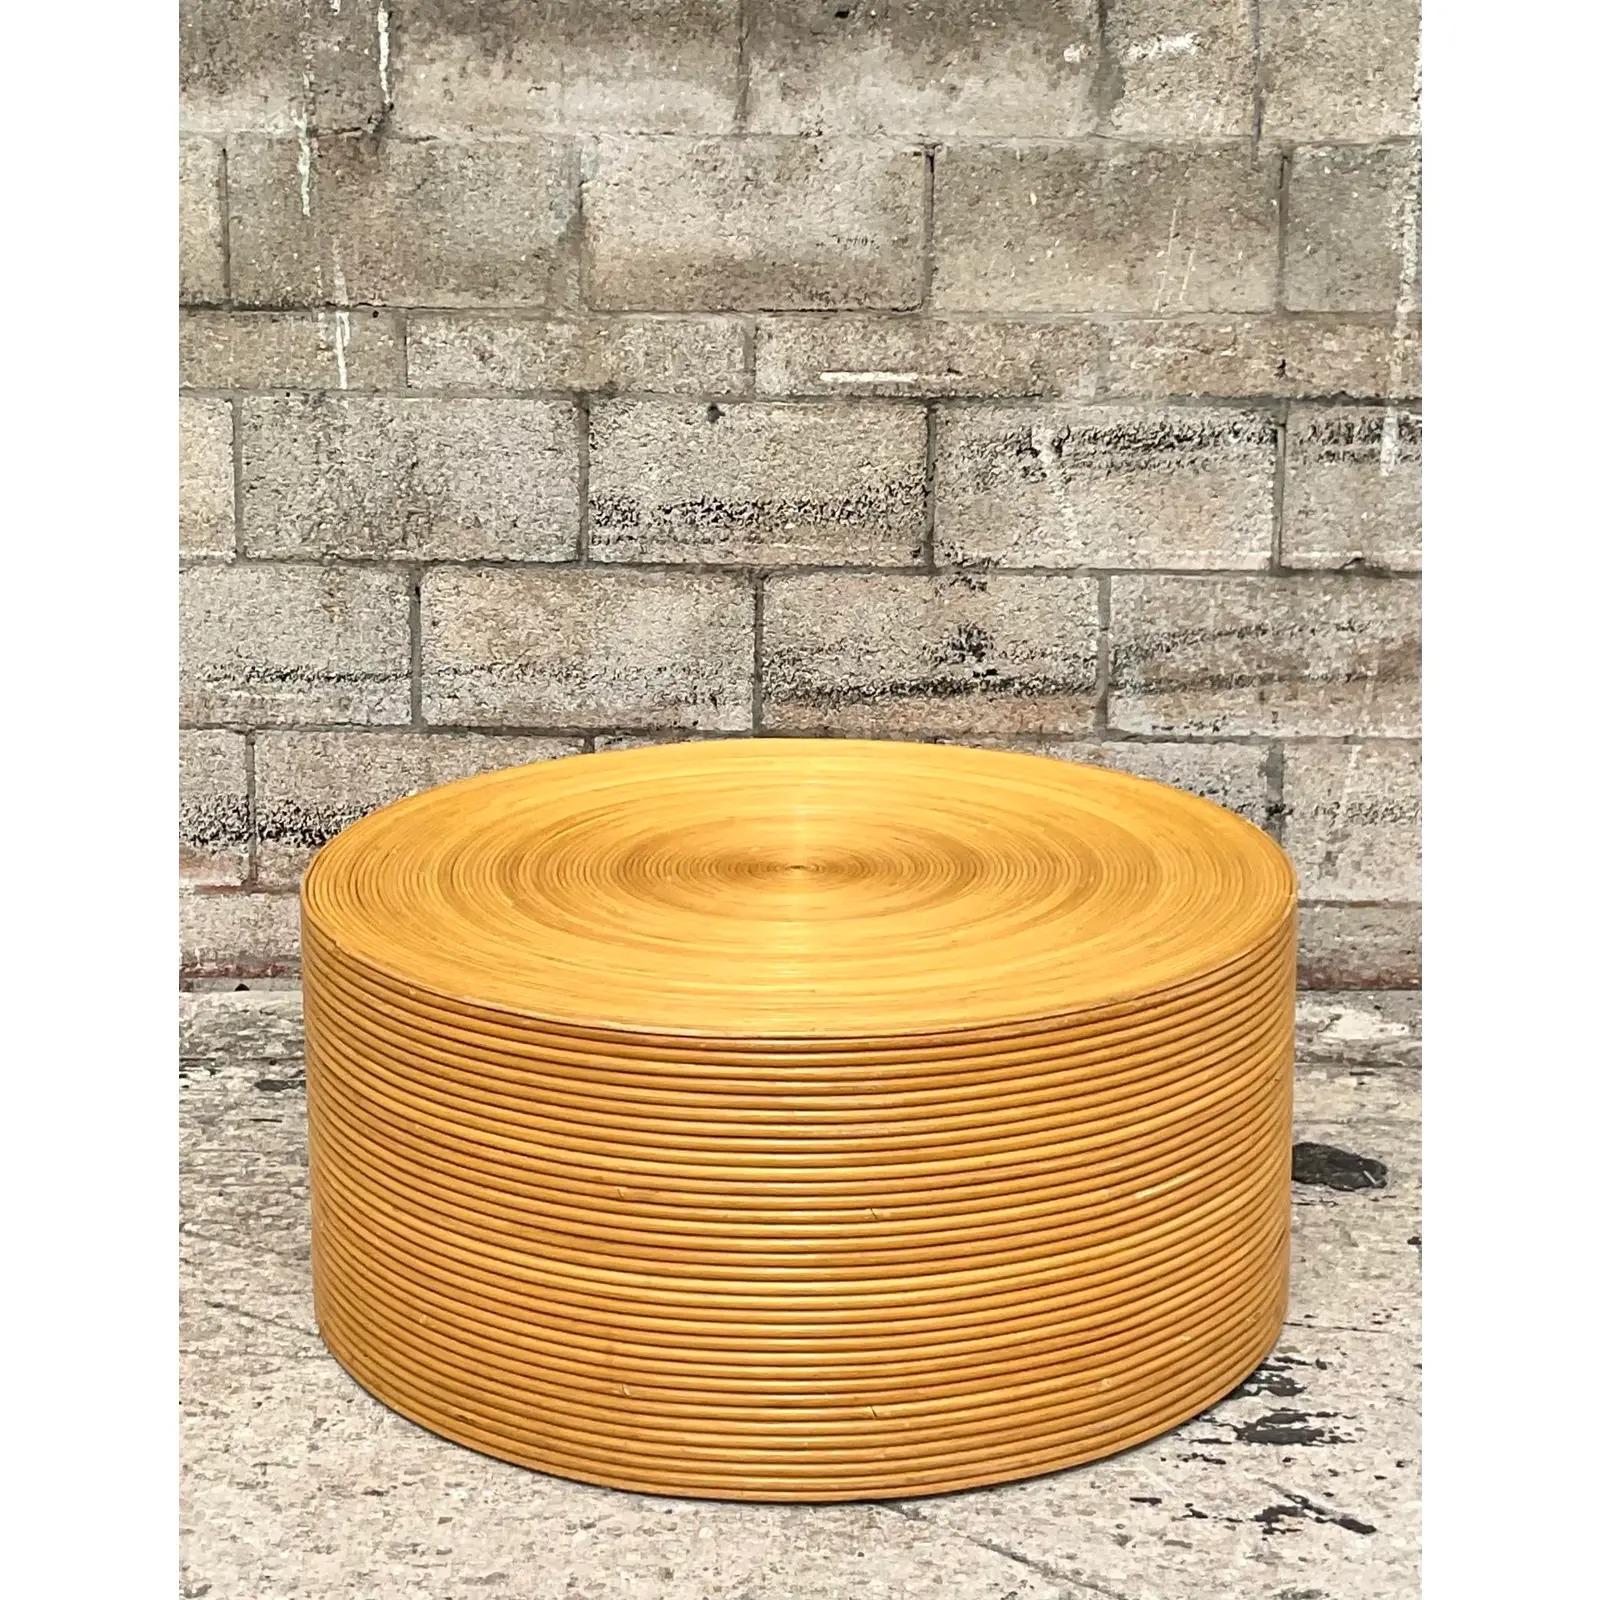 A fantastic vintage Coastal coffee table. Beautiful coiled pencil reed in a warm gold color. So perfect in so many spaces. Perfect as is or just add glass for a high traffic area. Acquired from a Palm Beach estate.